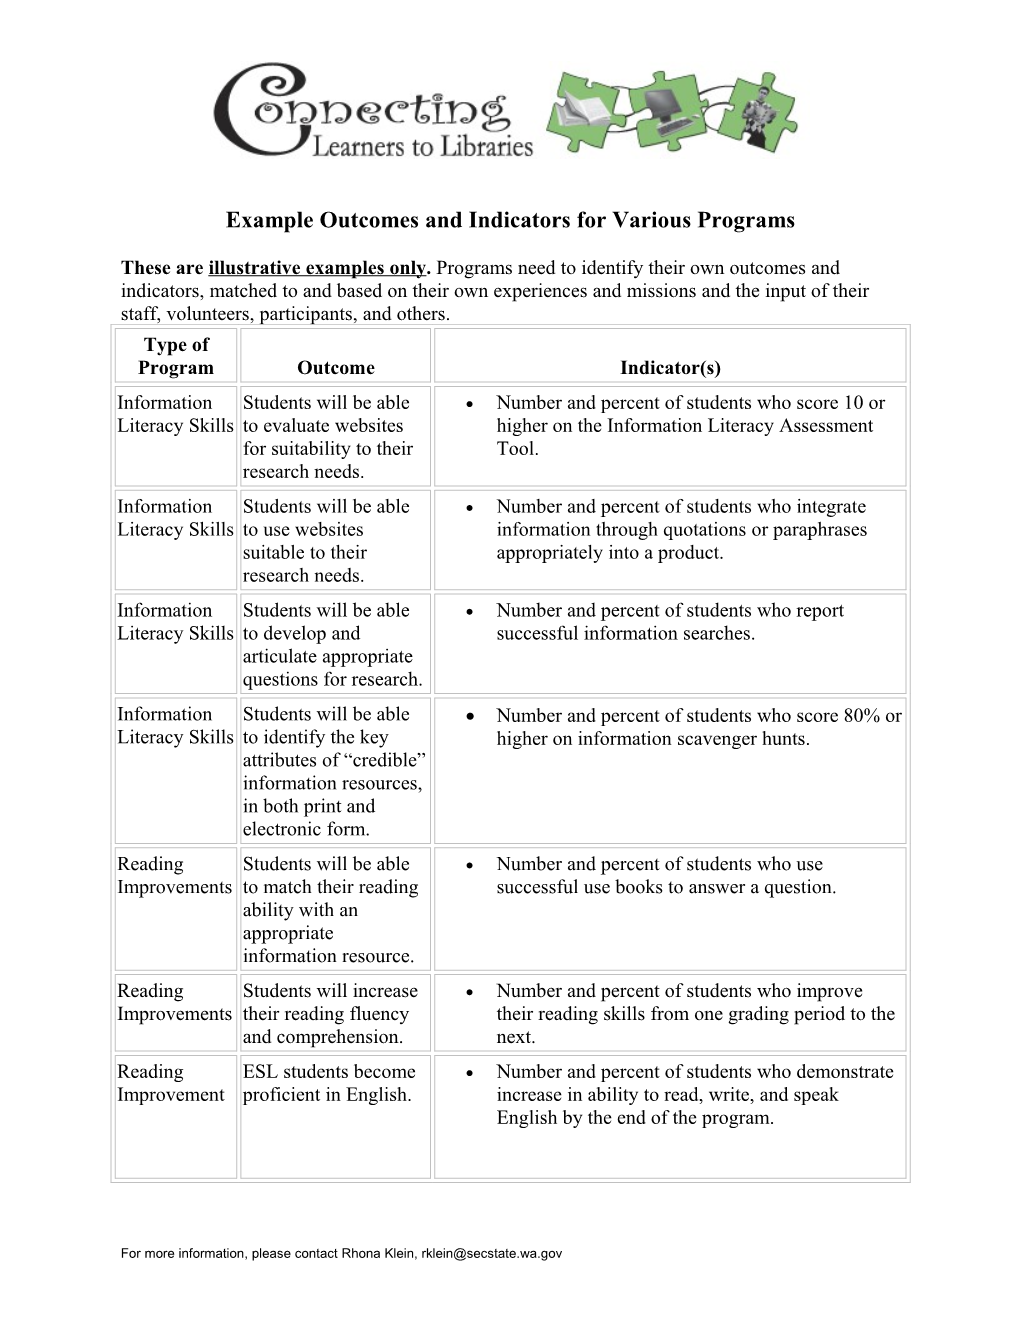 Example Outcomes And Outcome Indicators